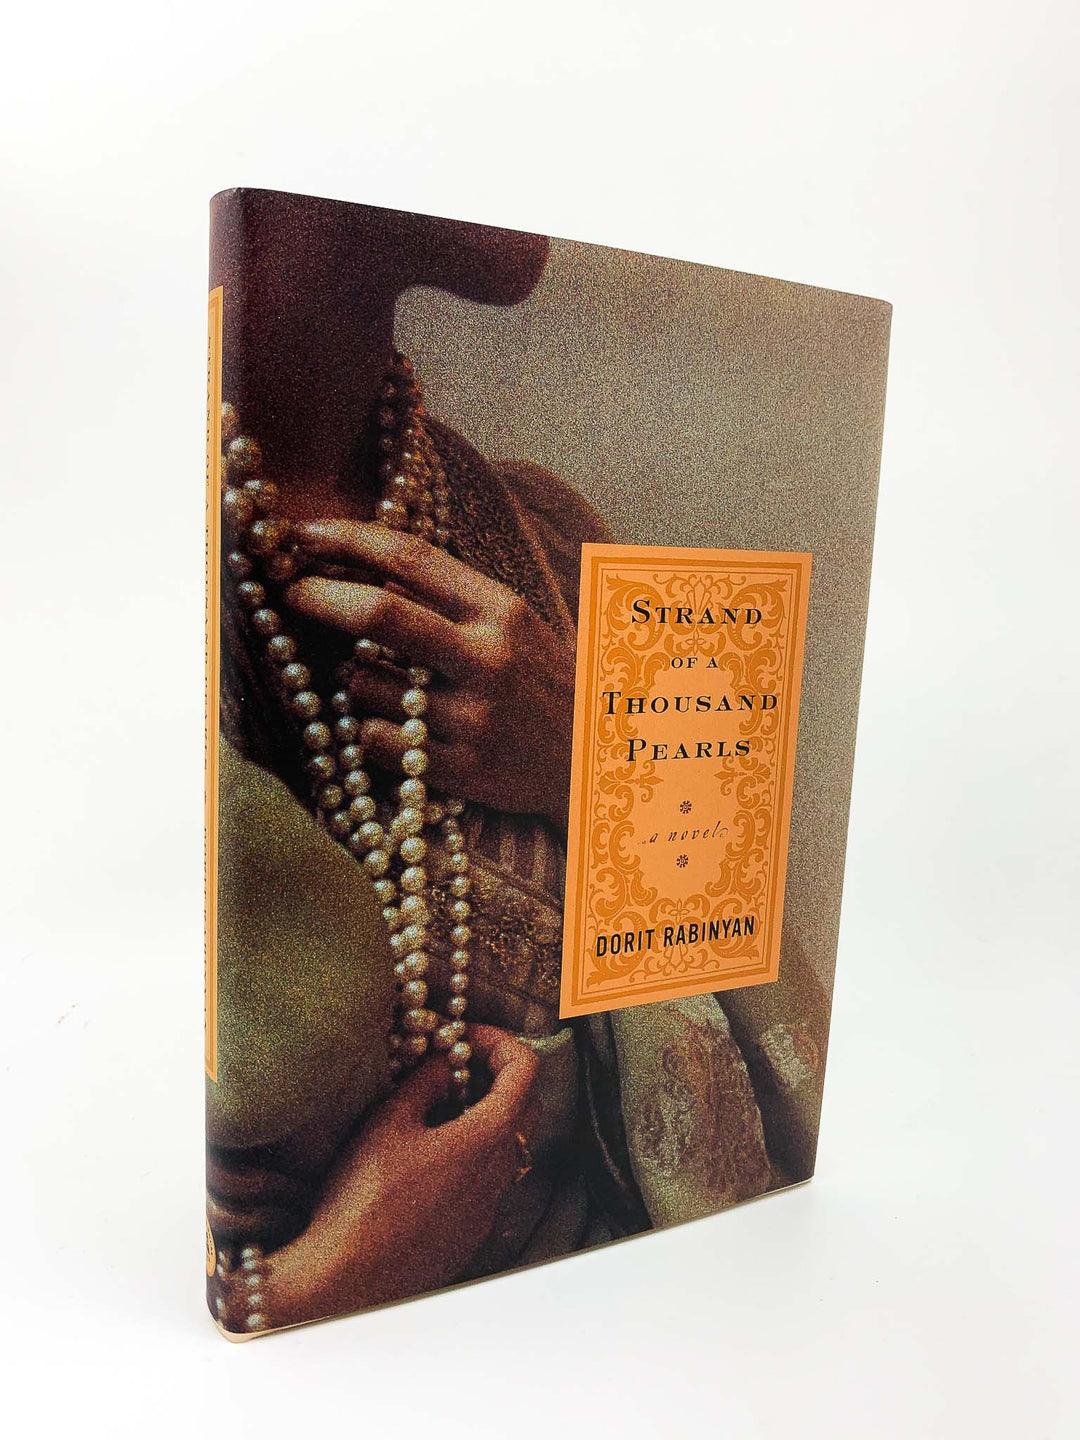 Rabinyan, Dorit - Strand of a Thousand Pearls | front cover